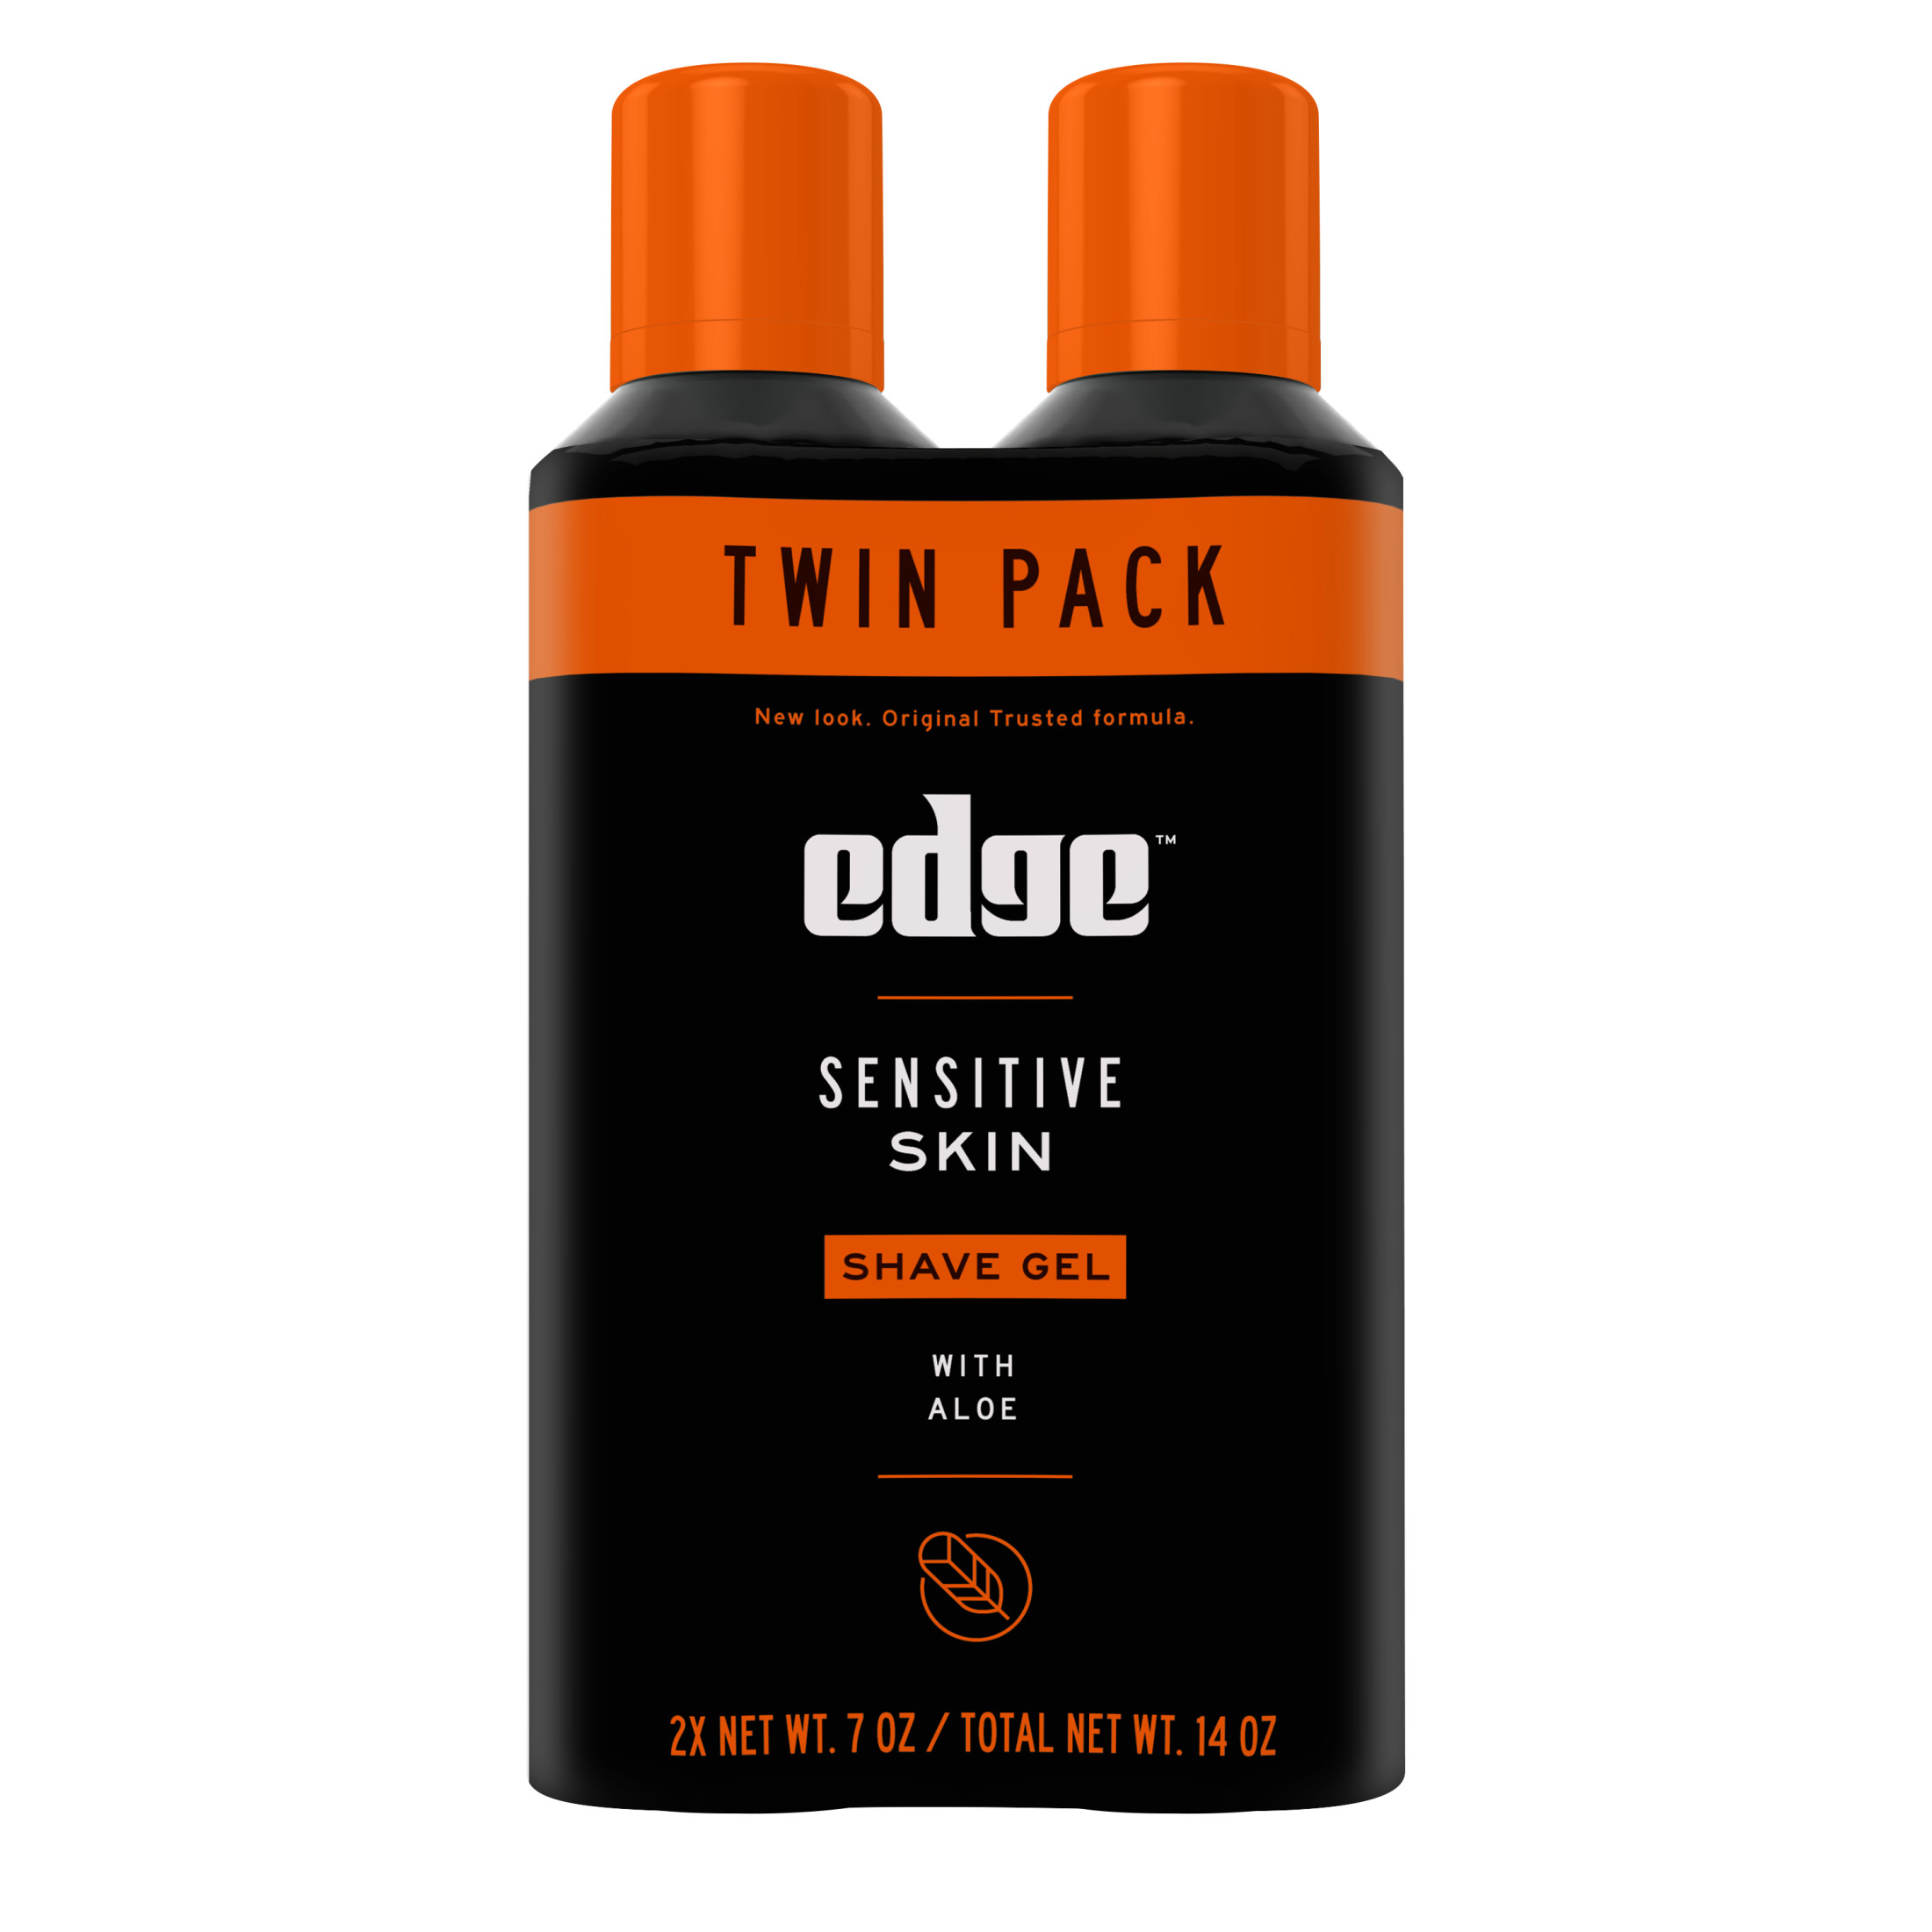 Edge Sensitive Skin Shave Gel for Men with Aloe, Twin Pack, 14 oz - image 1 of 10